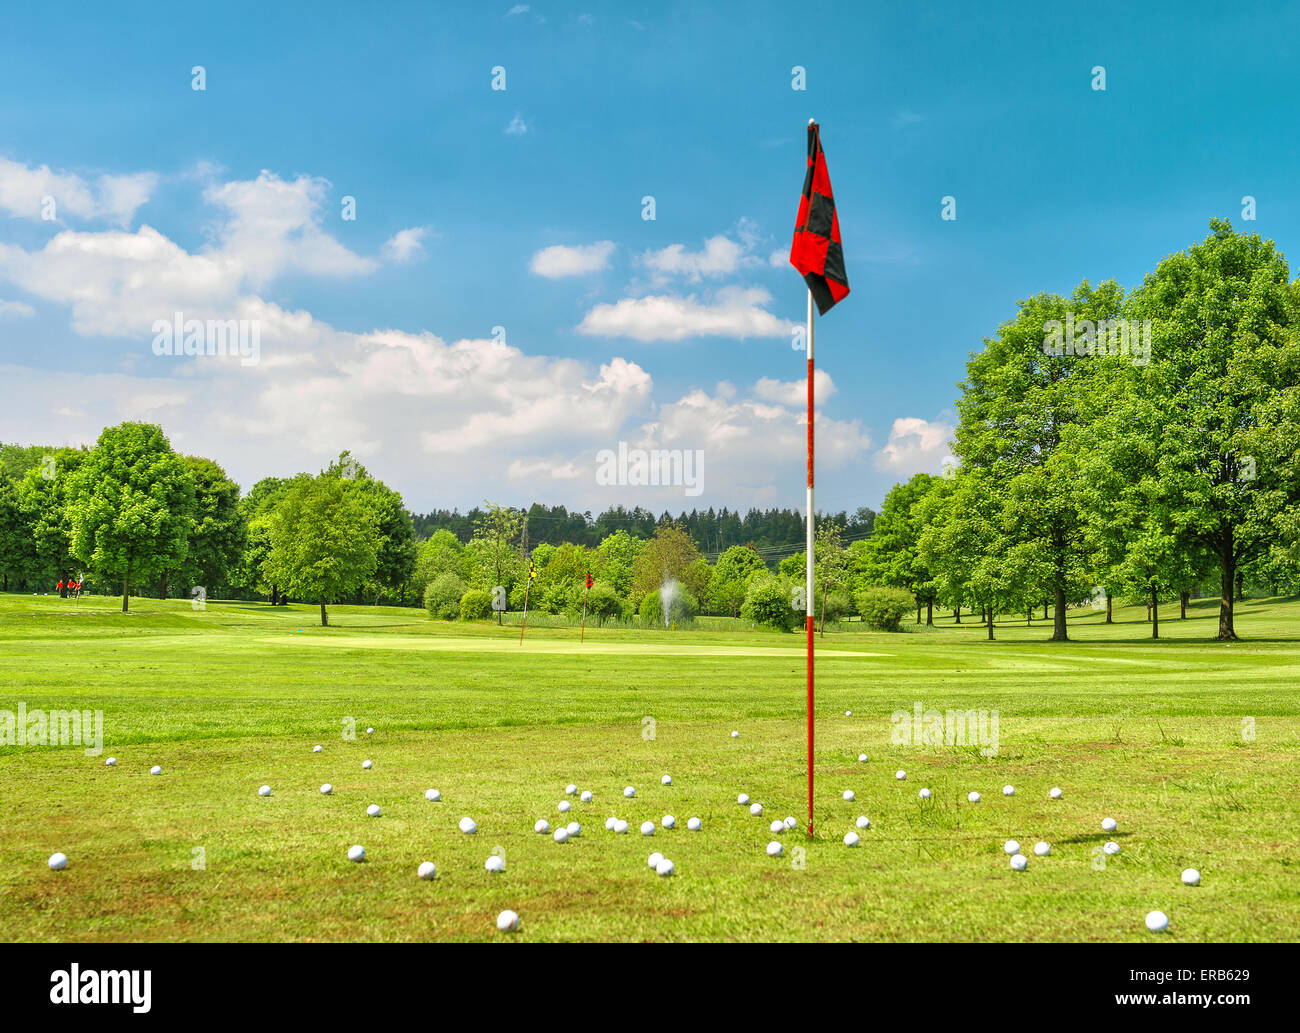 Golf field and cloudy blue sky. European spring landscape with green grass and trees Stock Photo